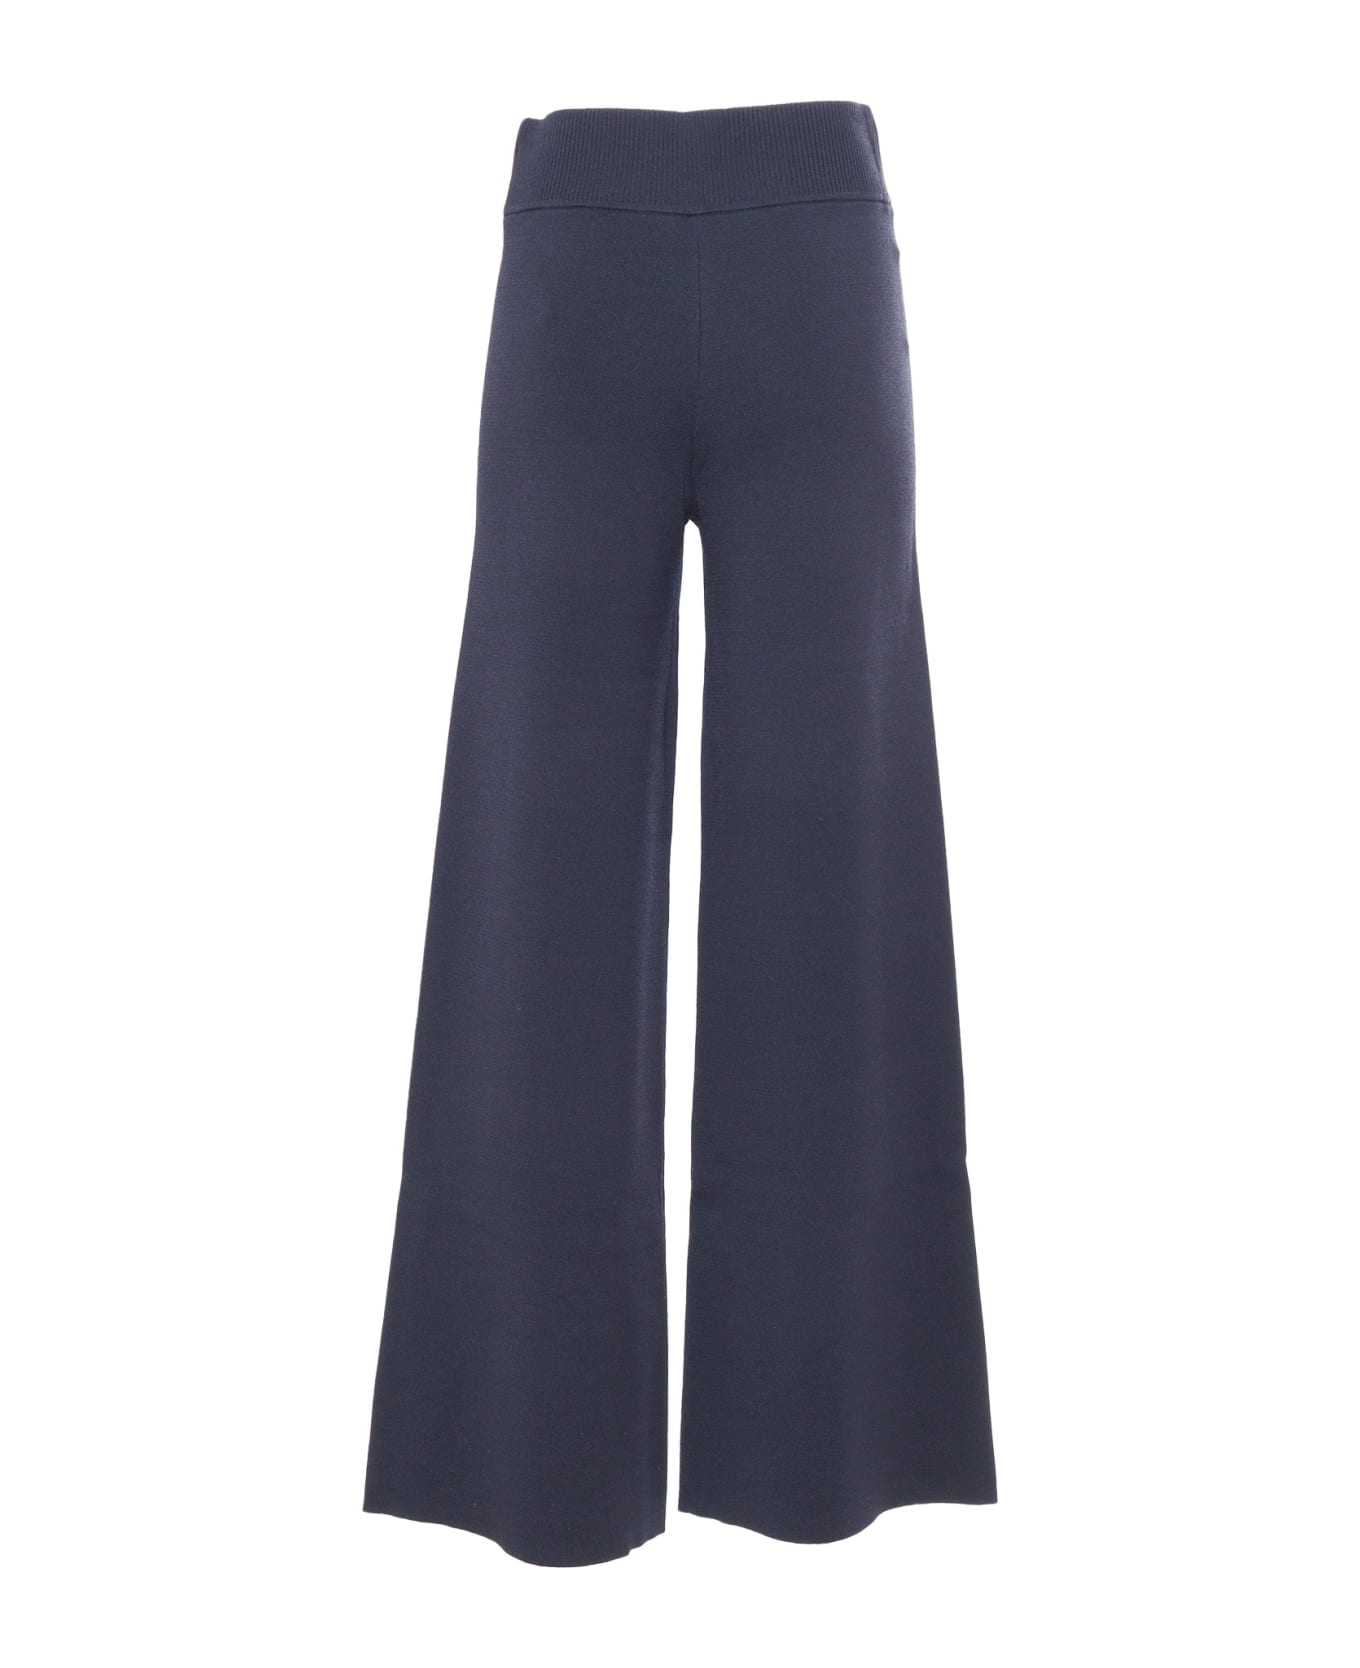 Parosh Flared Knitted Trousers - BLUE ボトムス